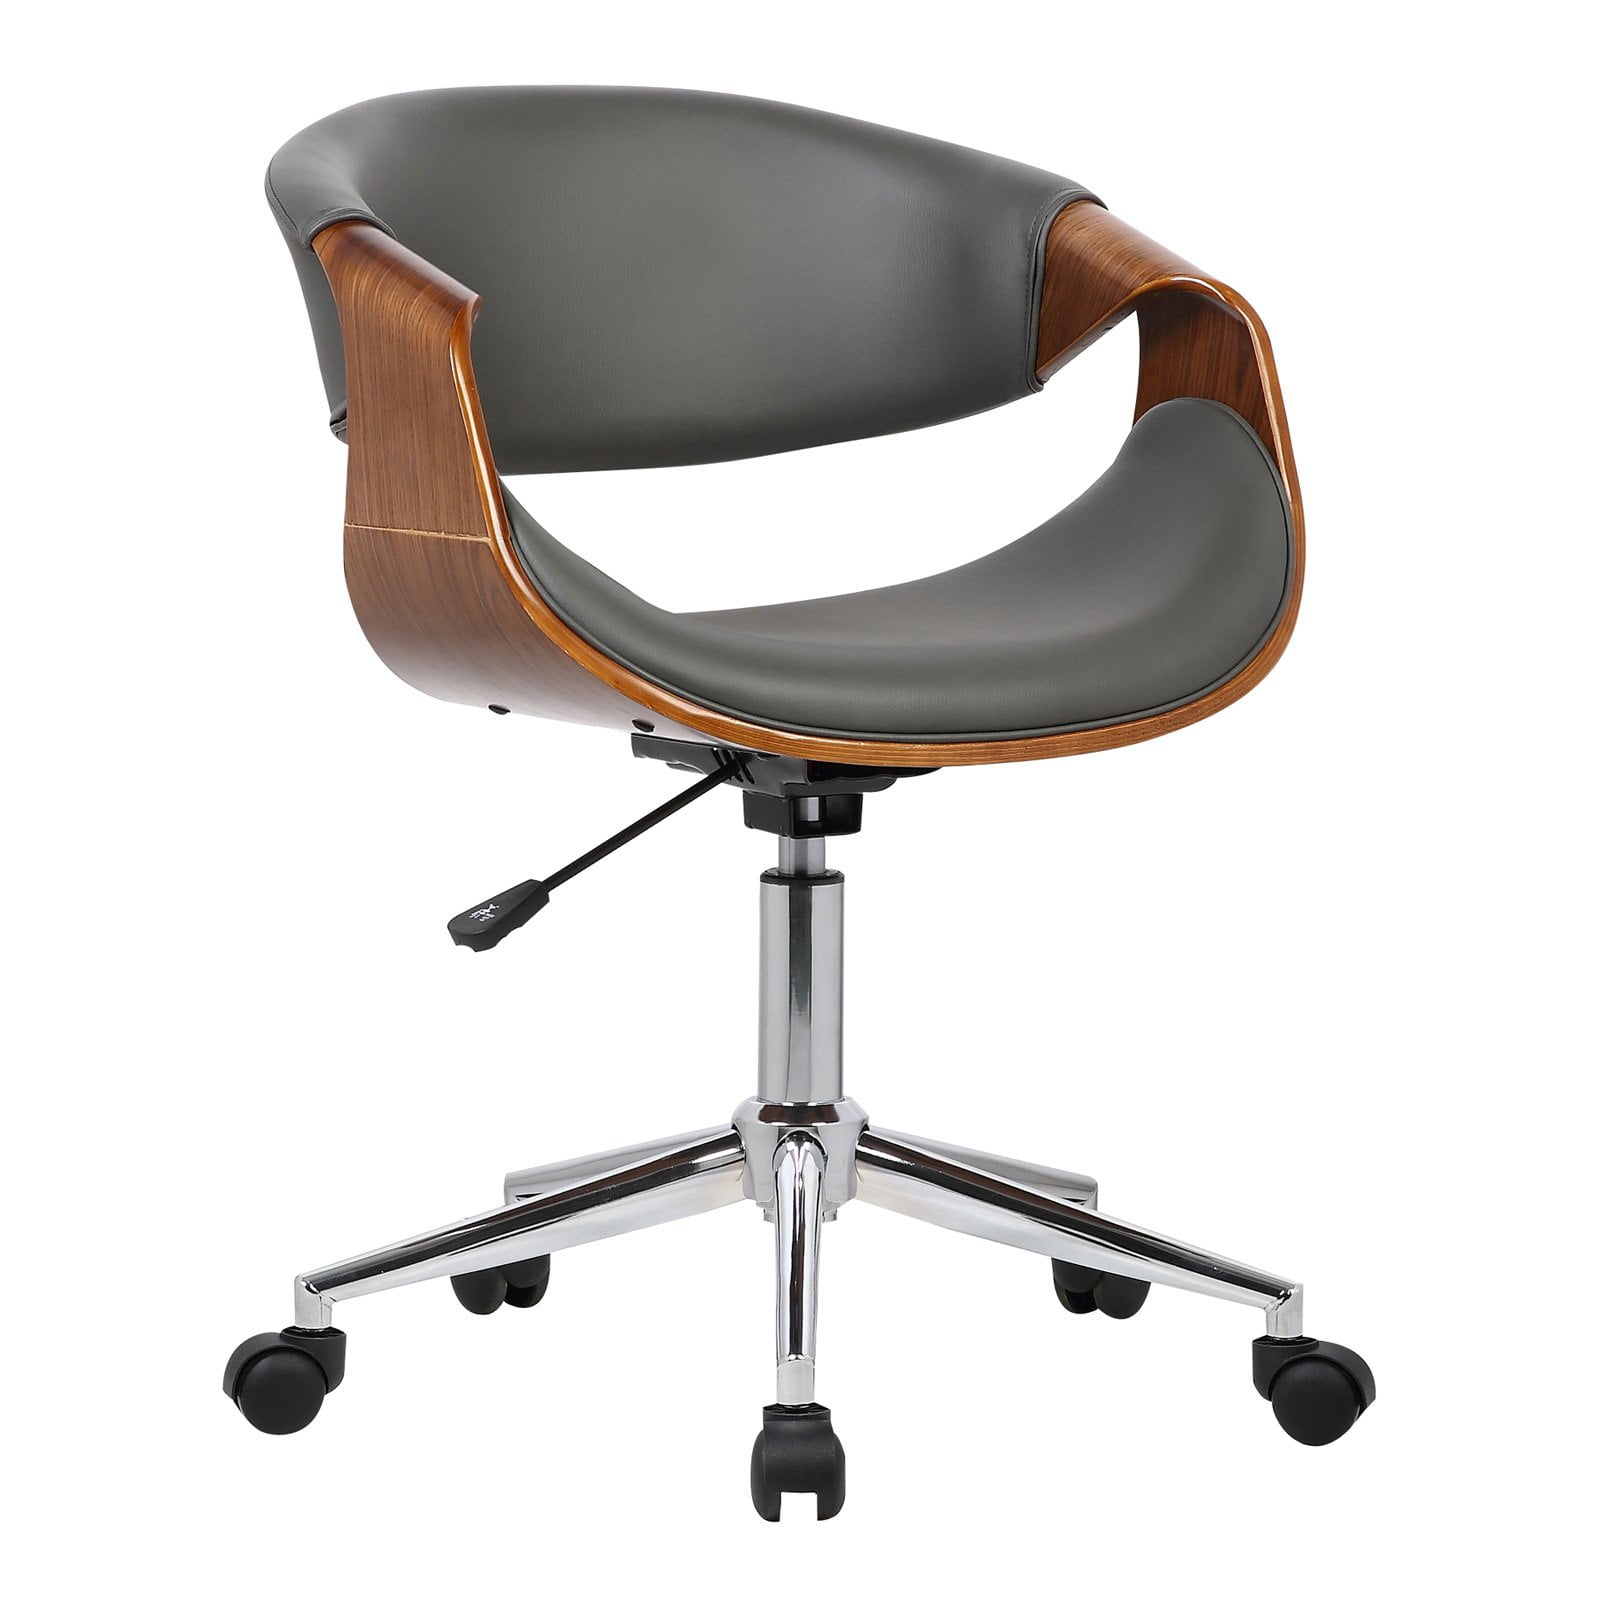 Lcgeofchgrey Geneva Mid-century Office Chair In Chrome With Gray Faux Leather Walnut Veneer Arms